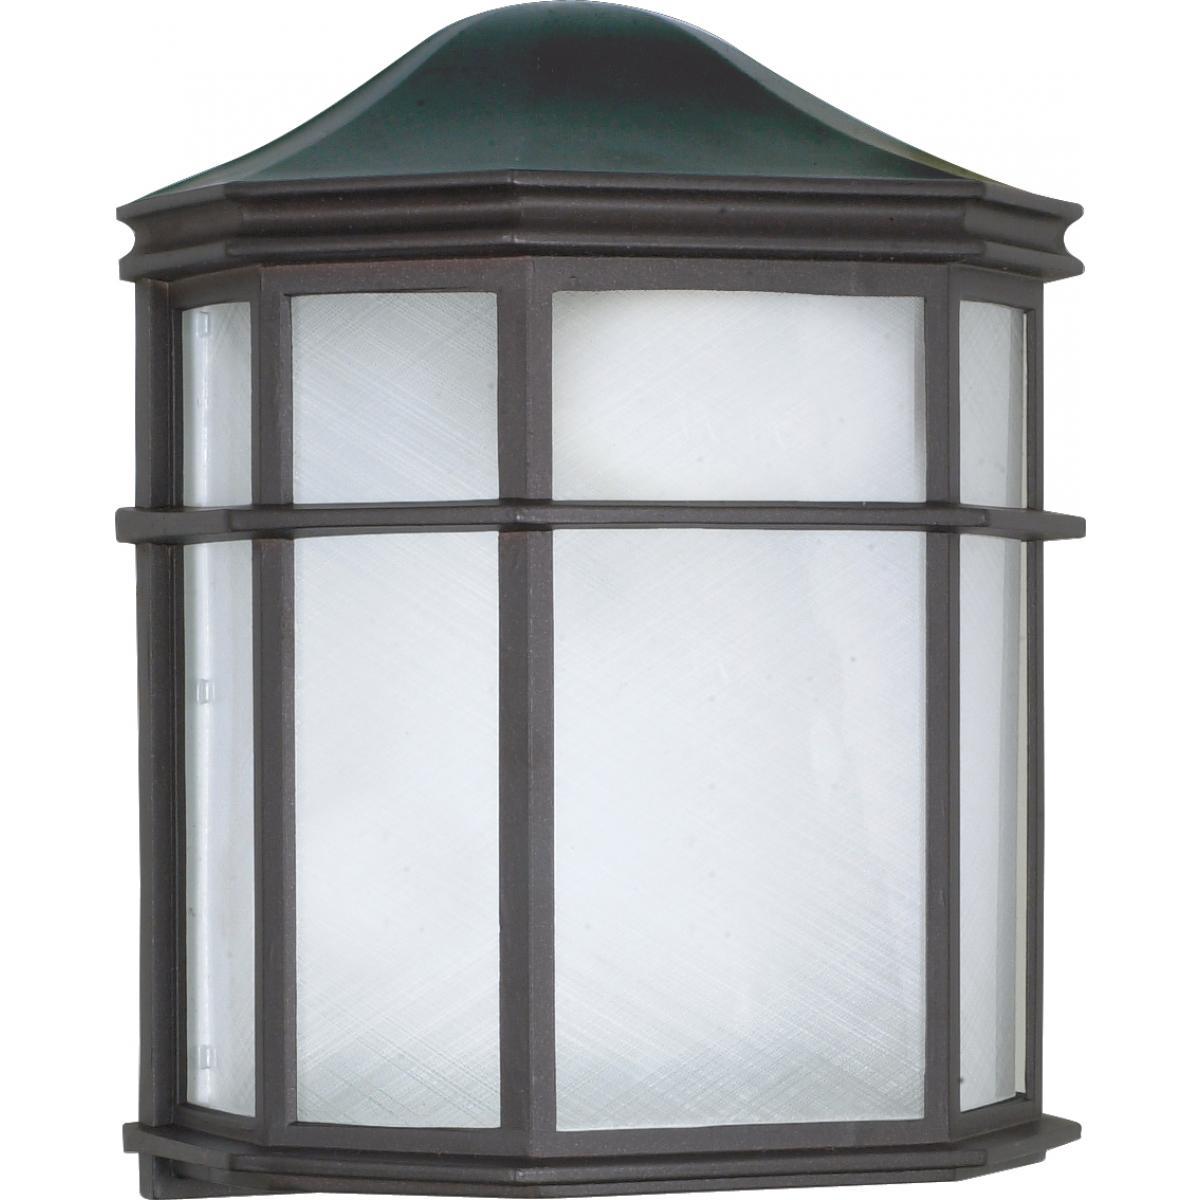 Die Cast Metal 10" Black Cage Lantern Wall Fixture with Linen Acrylic Lens Outdoor Nuvo Lighting Black 